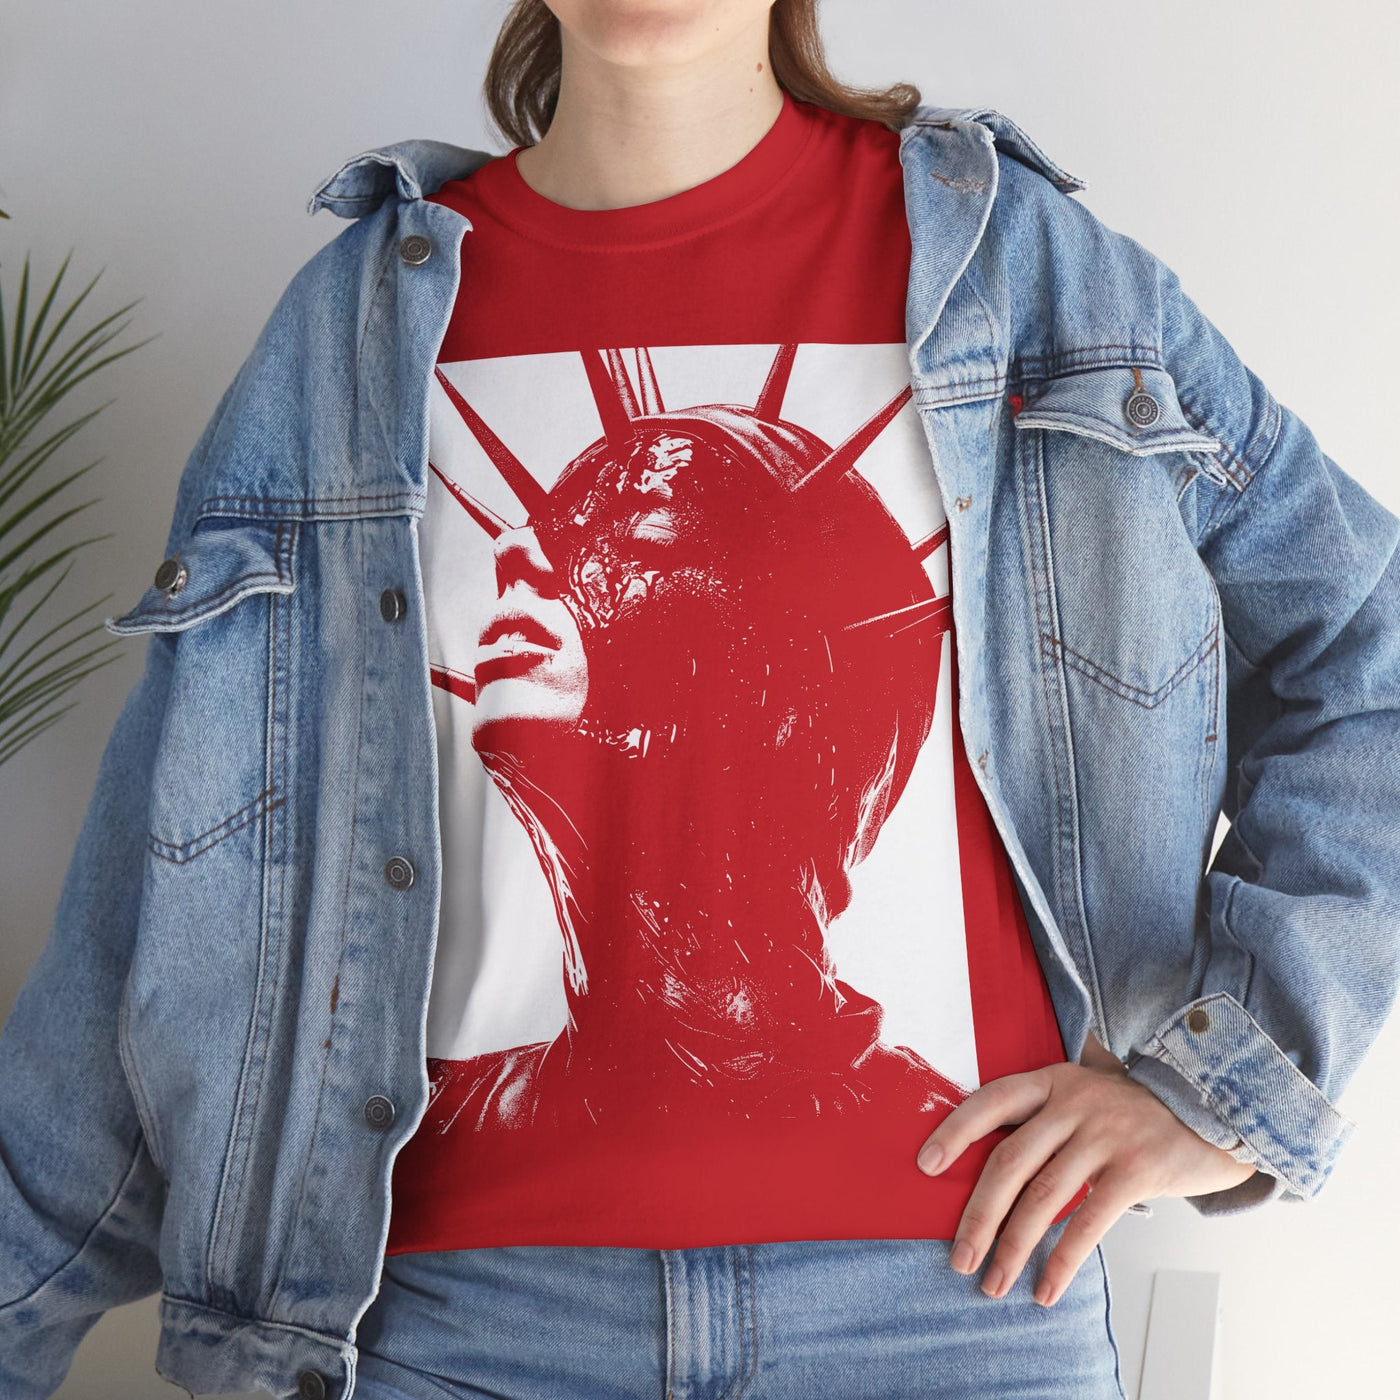 Wicked Girl with Spiky Latex Hood T-Shirt